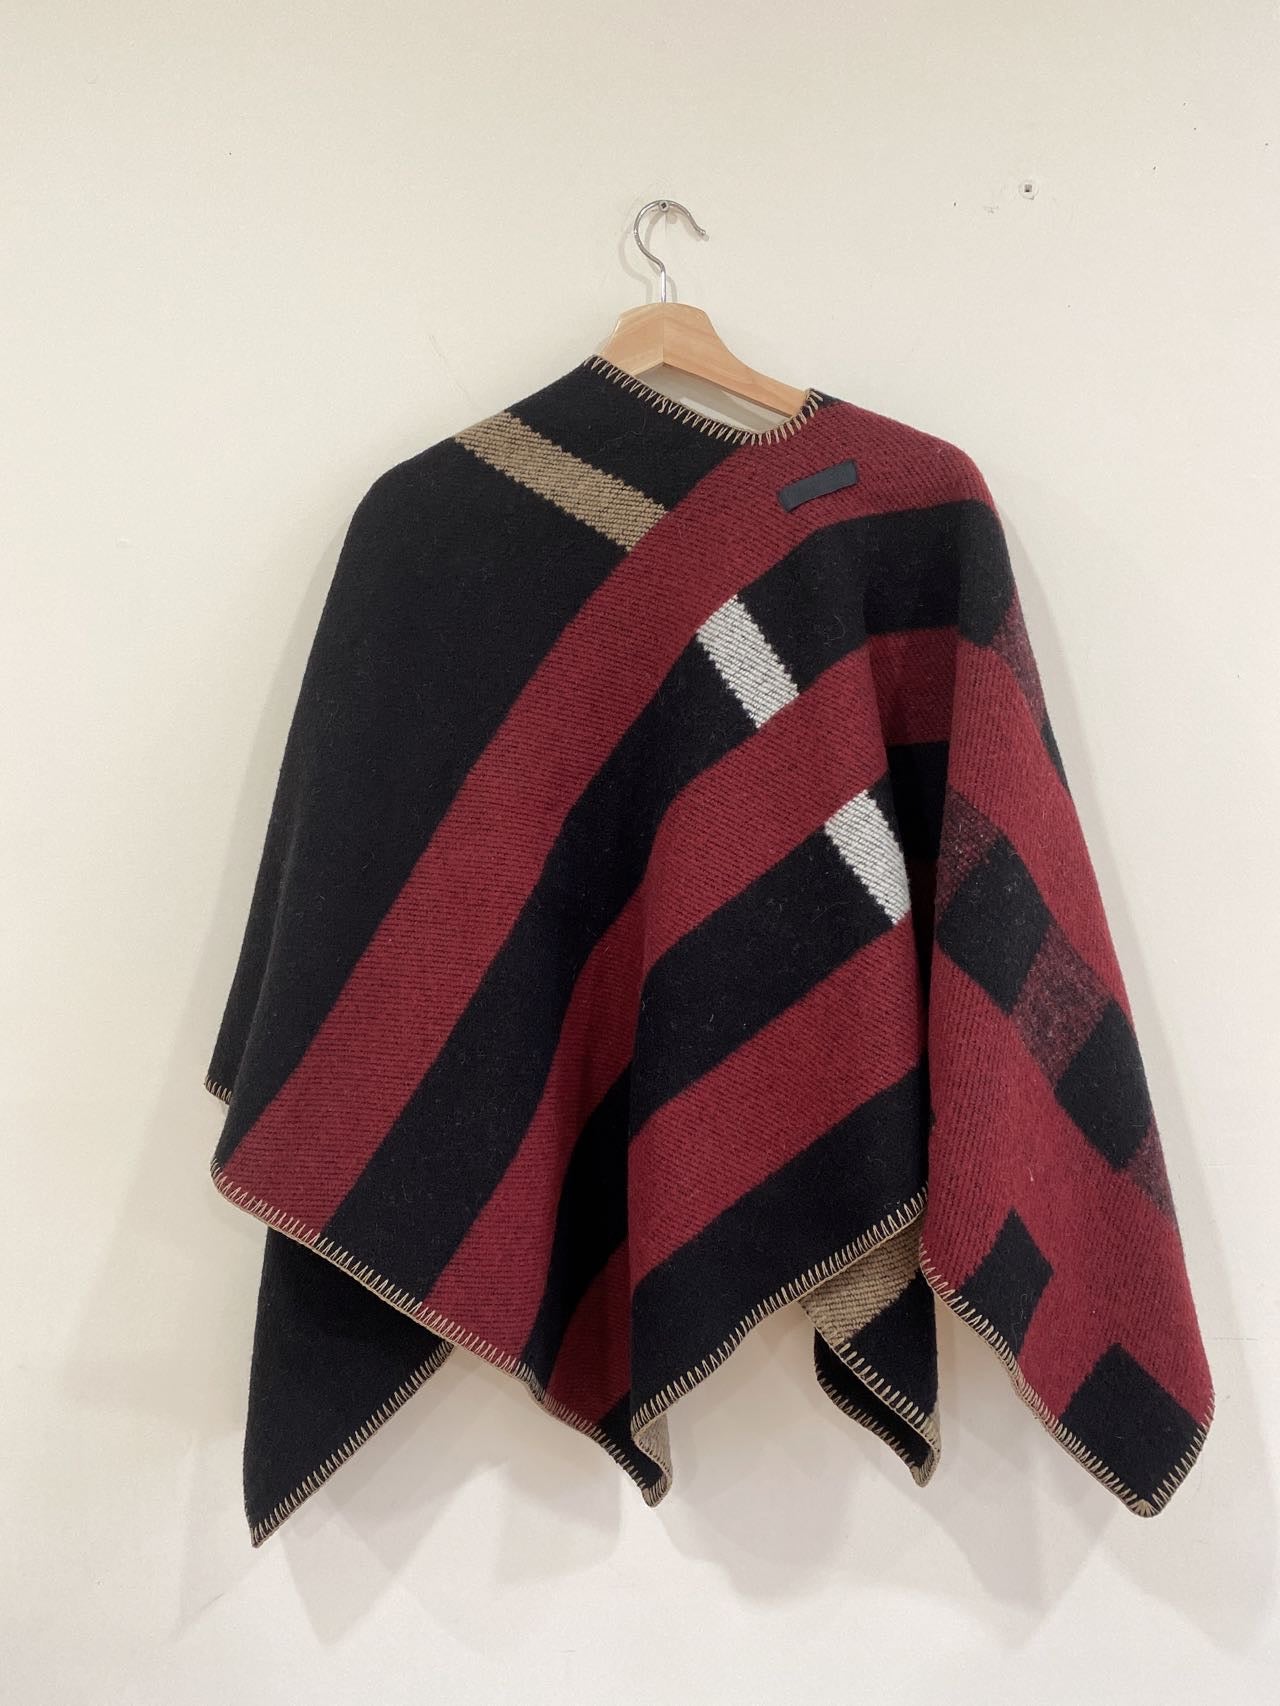 Clearance Burberry Wool and Cashmere Cap Blanket